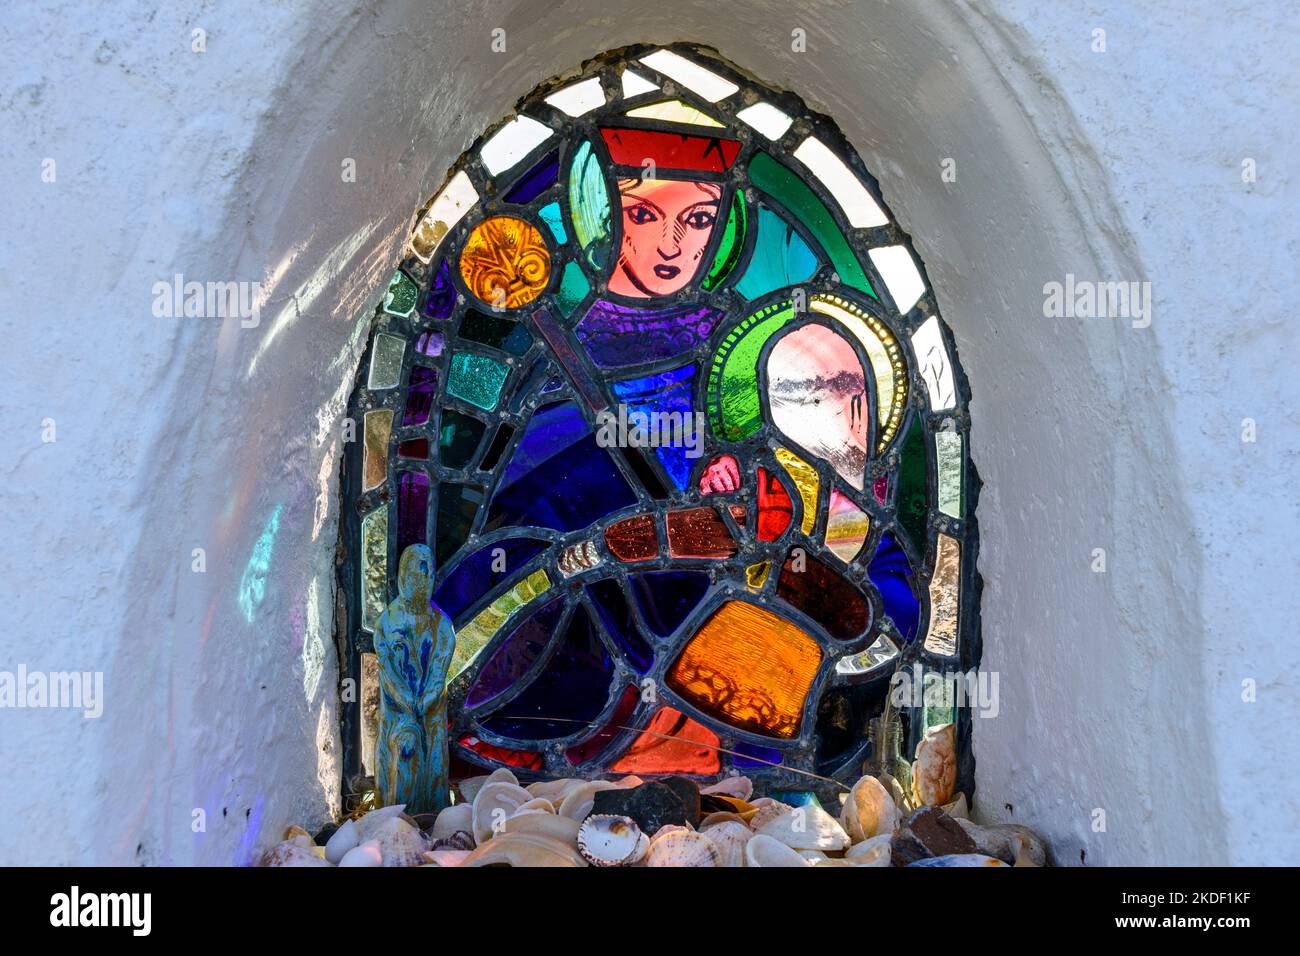 Stained glass in the Marian shrine at the Sanday-Canna bridge.  Isle of Sanday, Scotland, UK Stock Photo